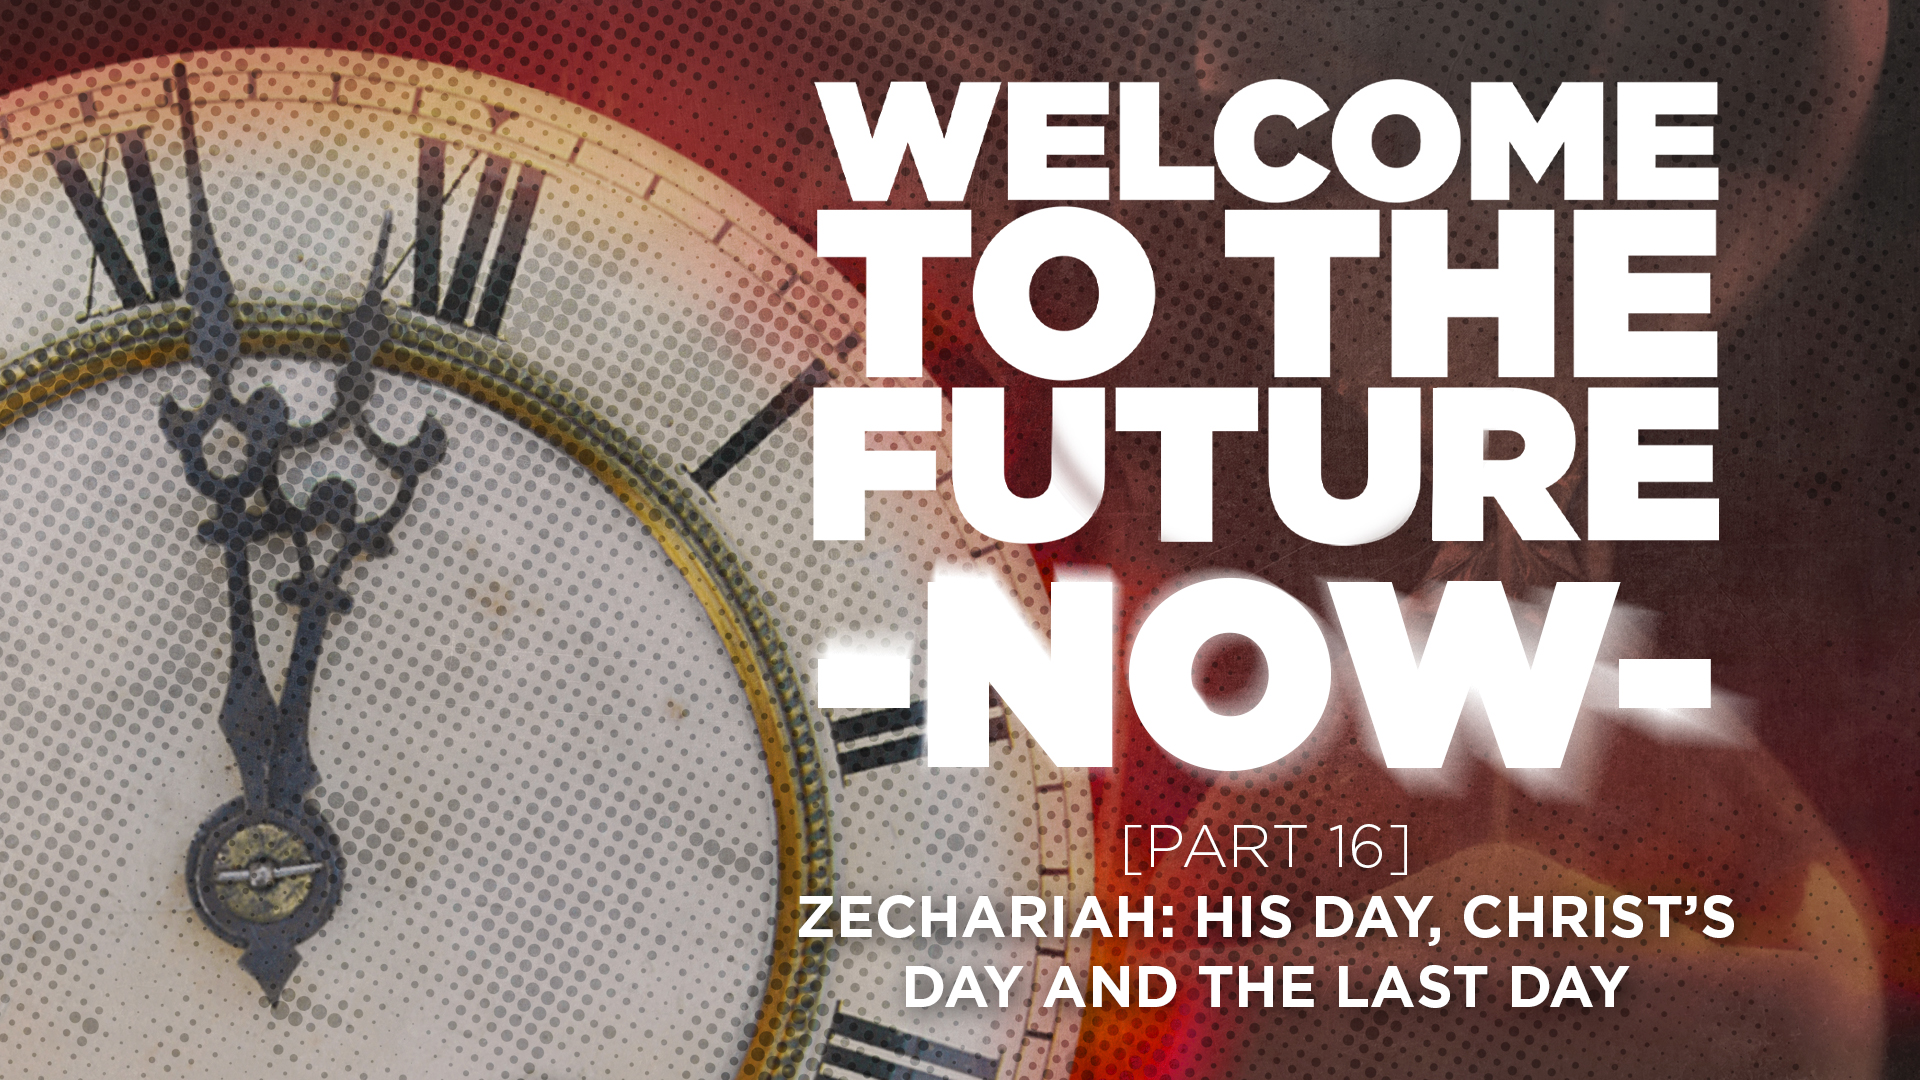 Part 16:-The Middle East And Bible Prophecy.’ Zechariah: His Day, Christ’s Day And The Last Day